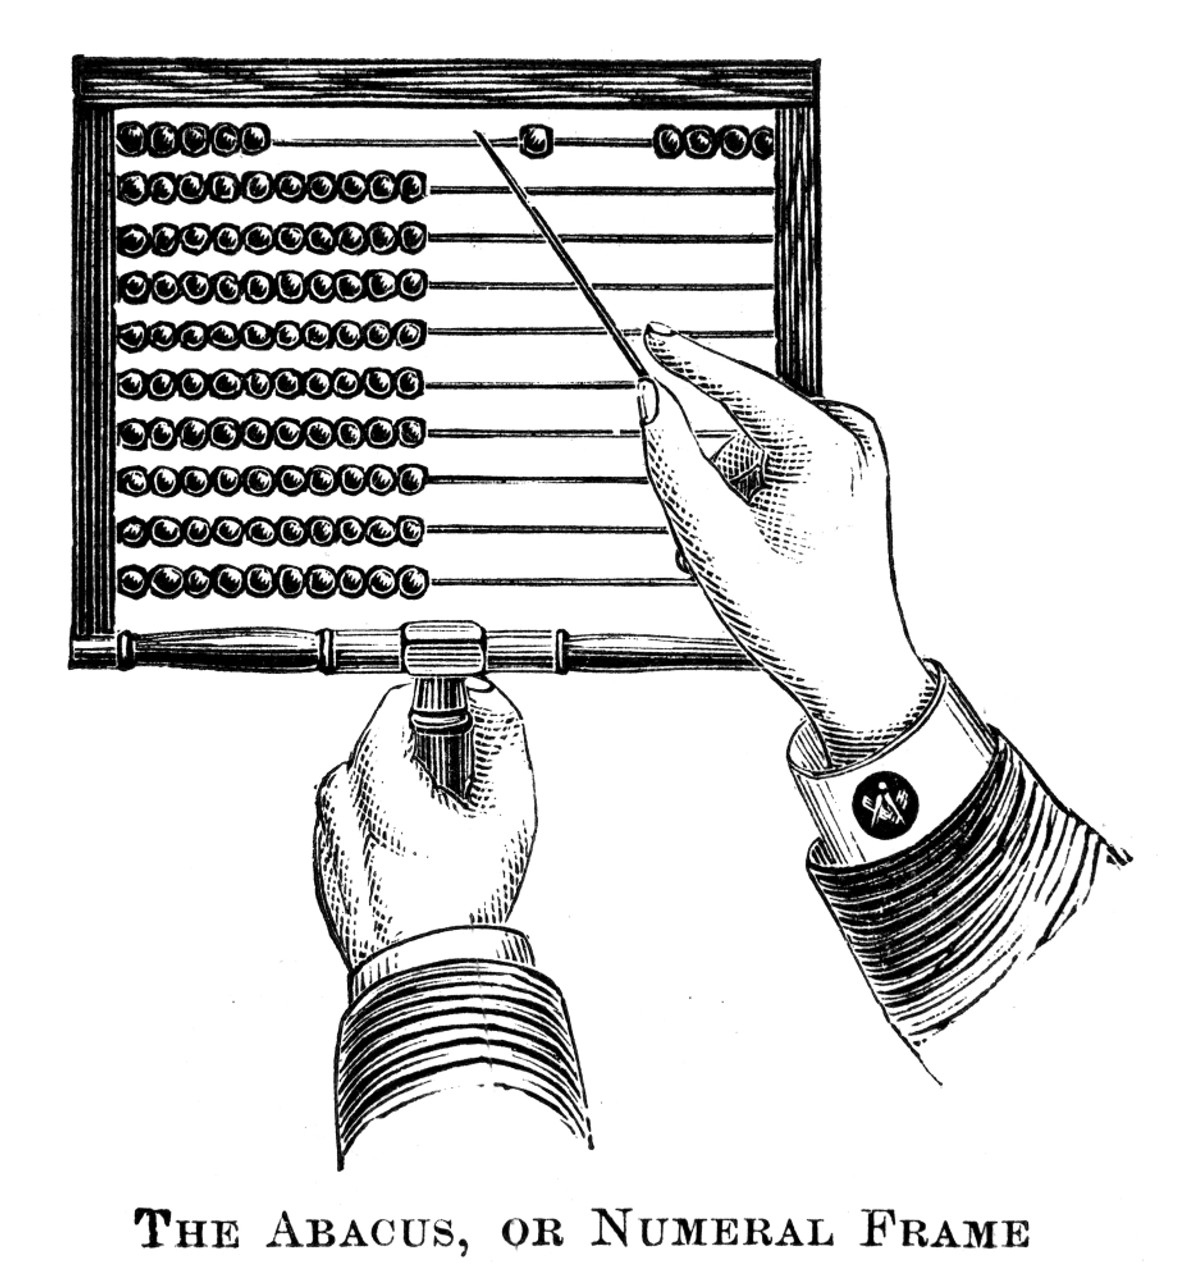 The Abacus and the Numeral Frame